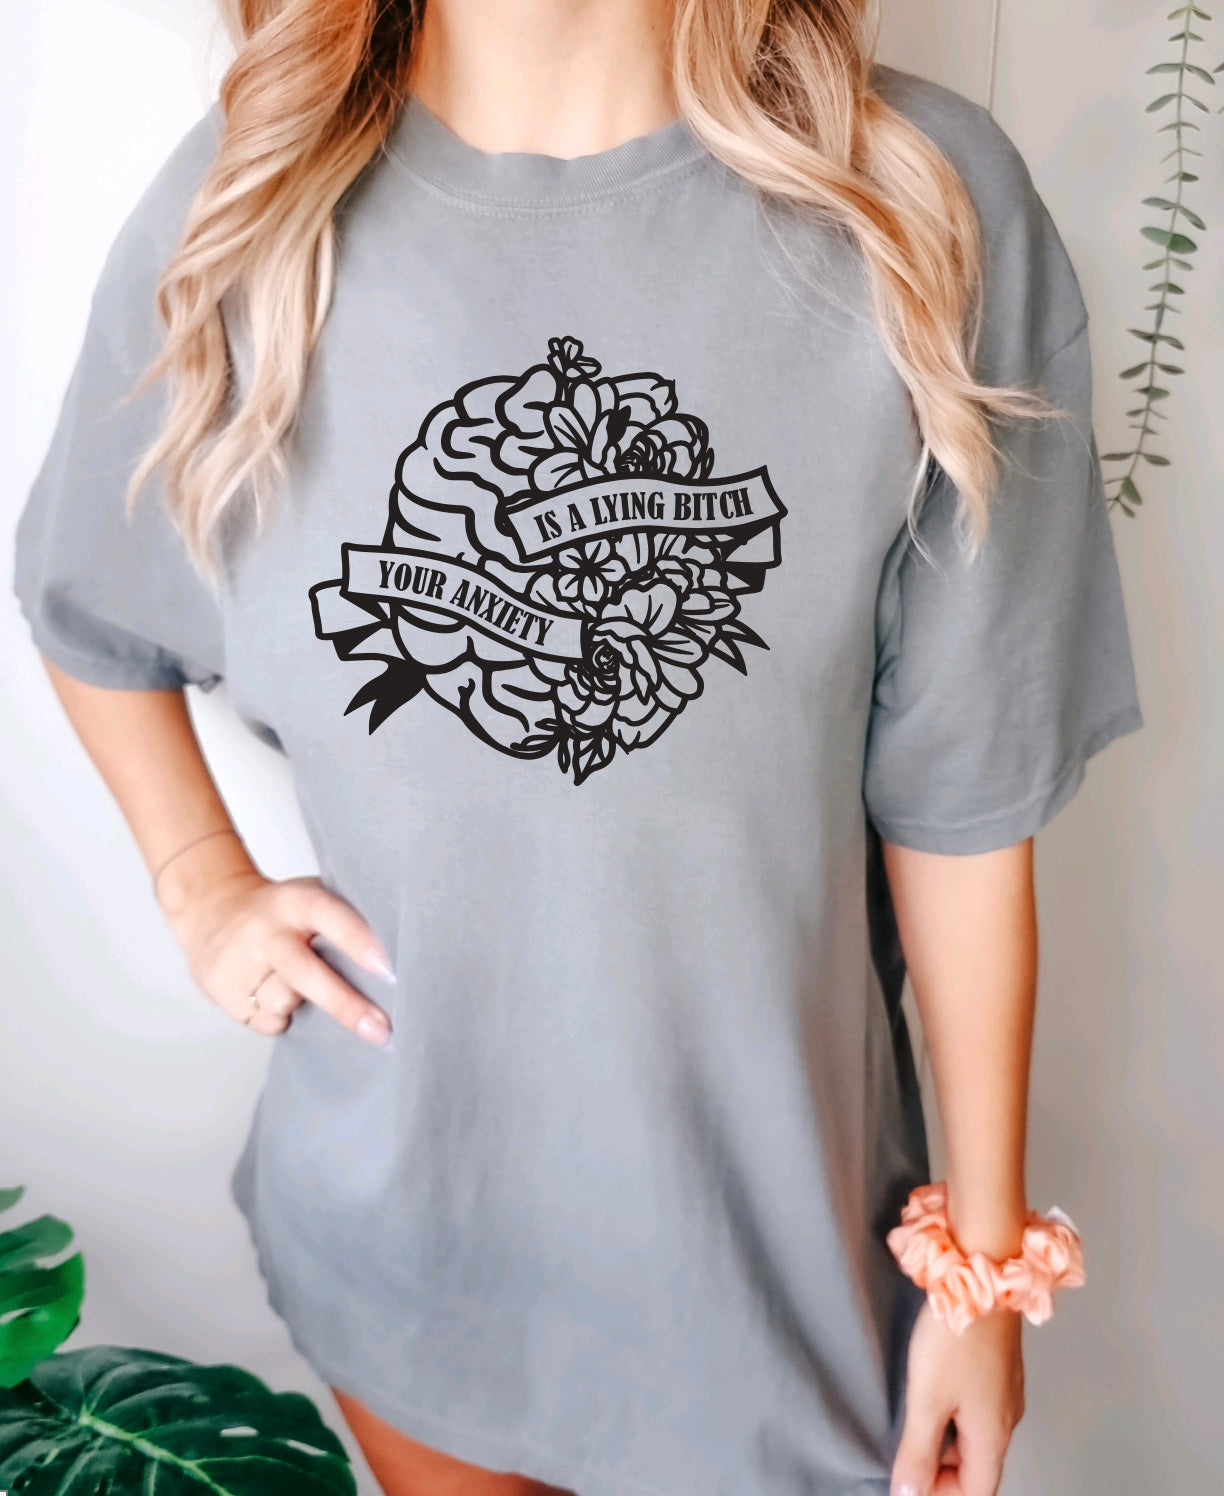 Your anxiety is a lying bitch comfort colors t-shirt with floral brain design in light grey